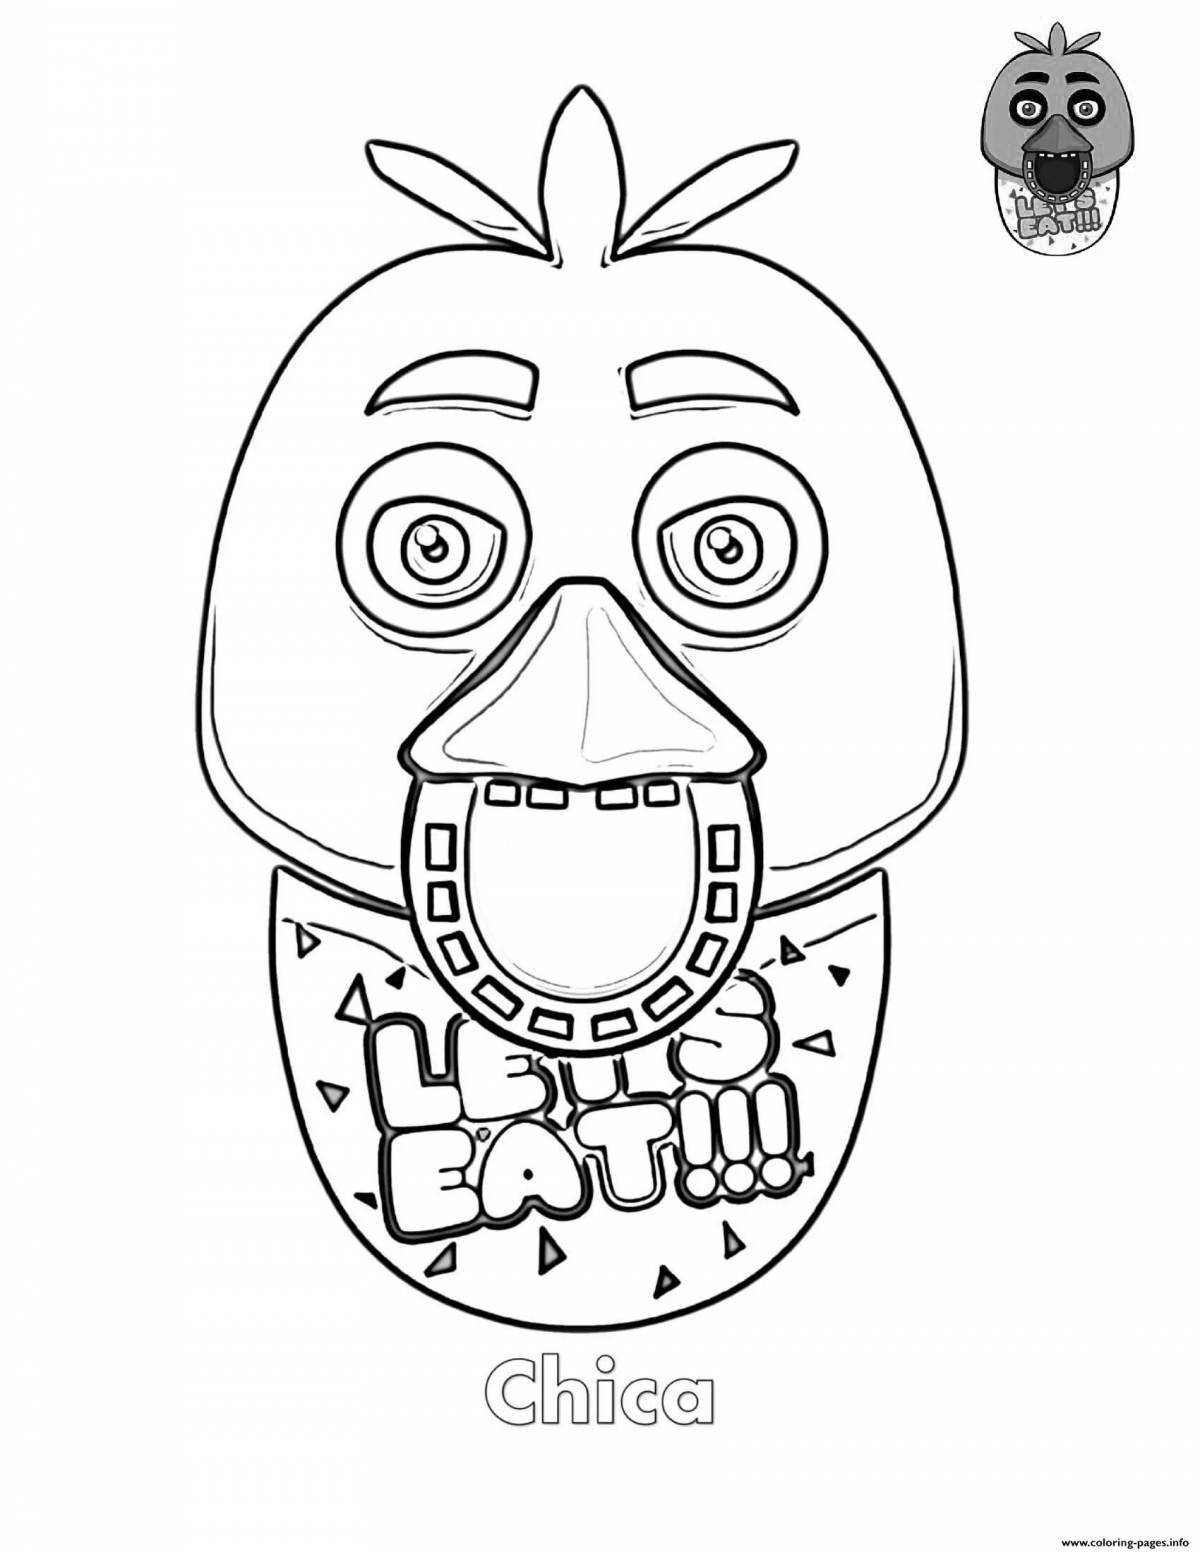 Lively chica fnaf 1 coloring page